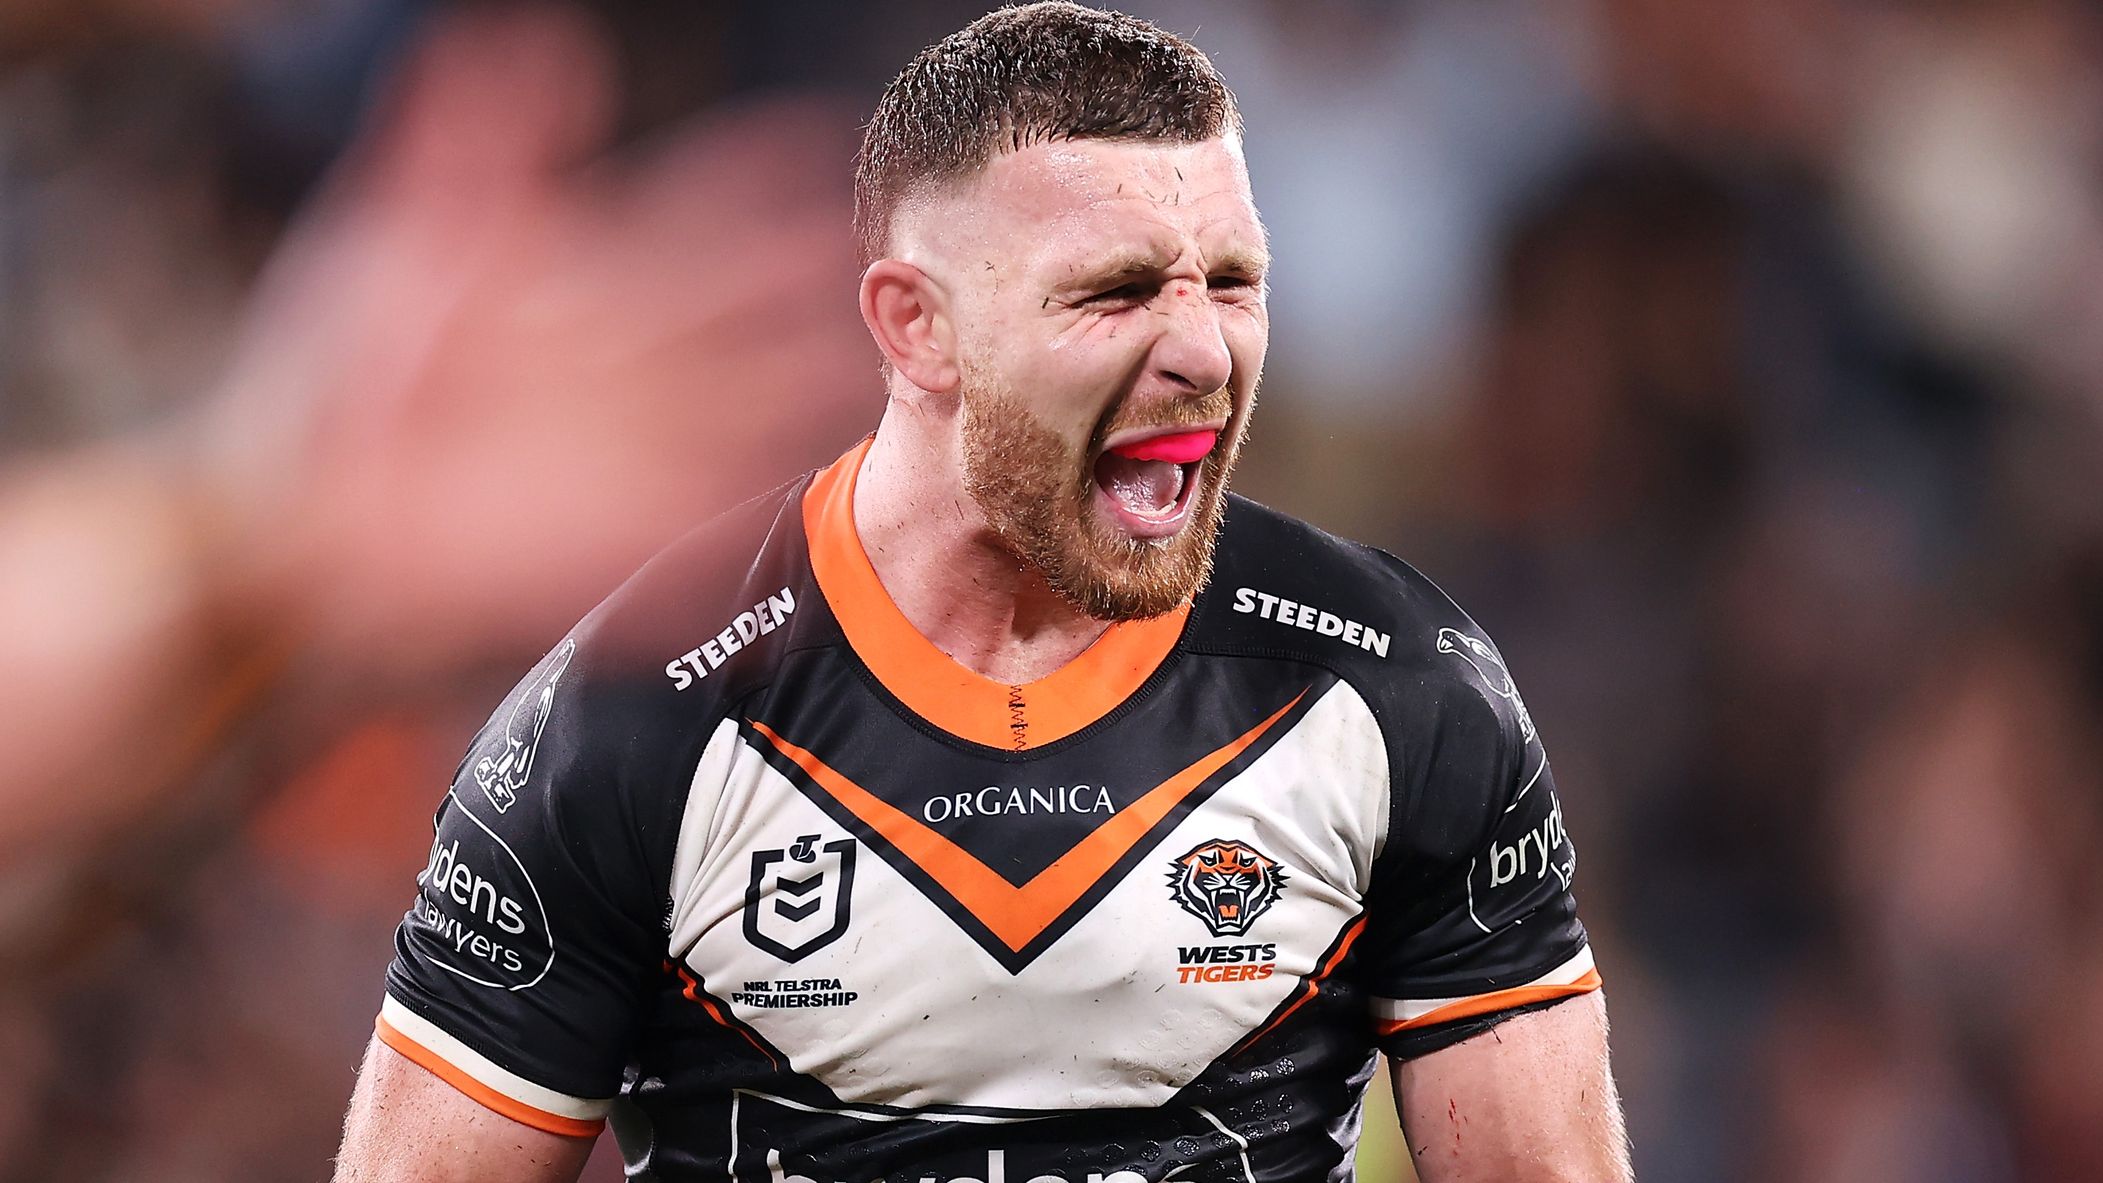 Jackson Hastings of the Tigers celebrates victory over South Sydney Rabbitohs.